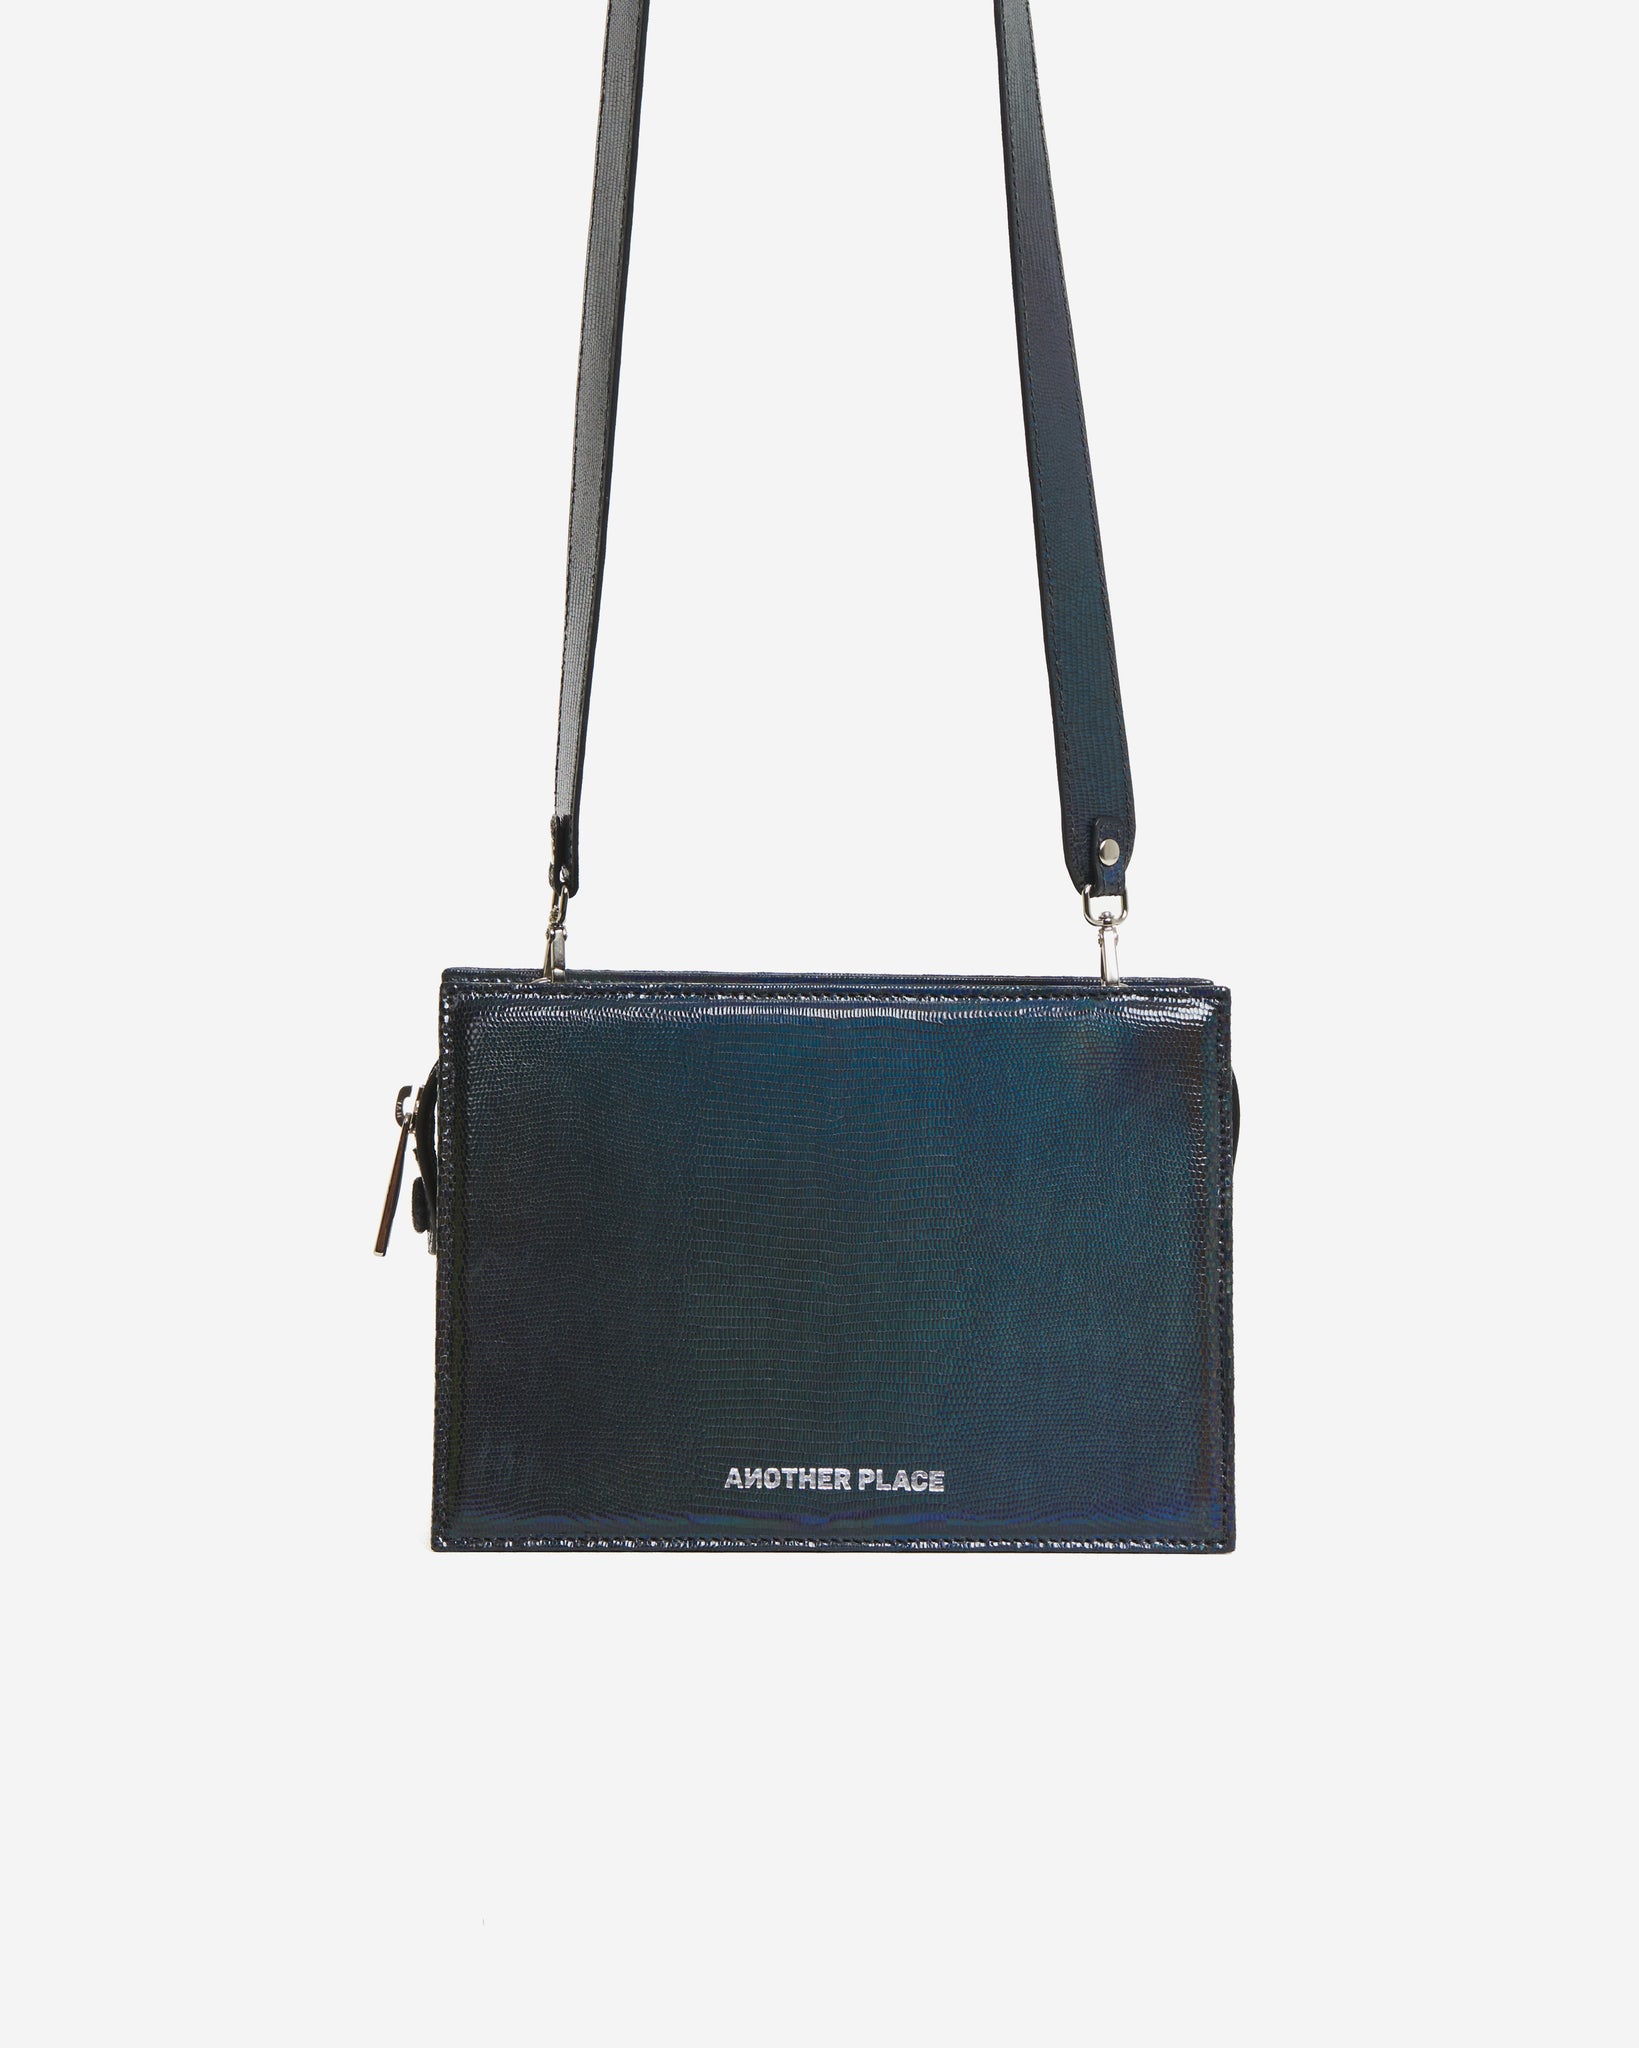 AnotherBag02 Holographic